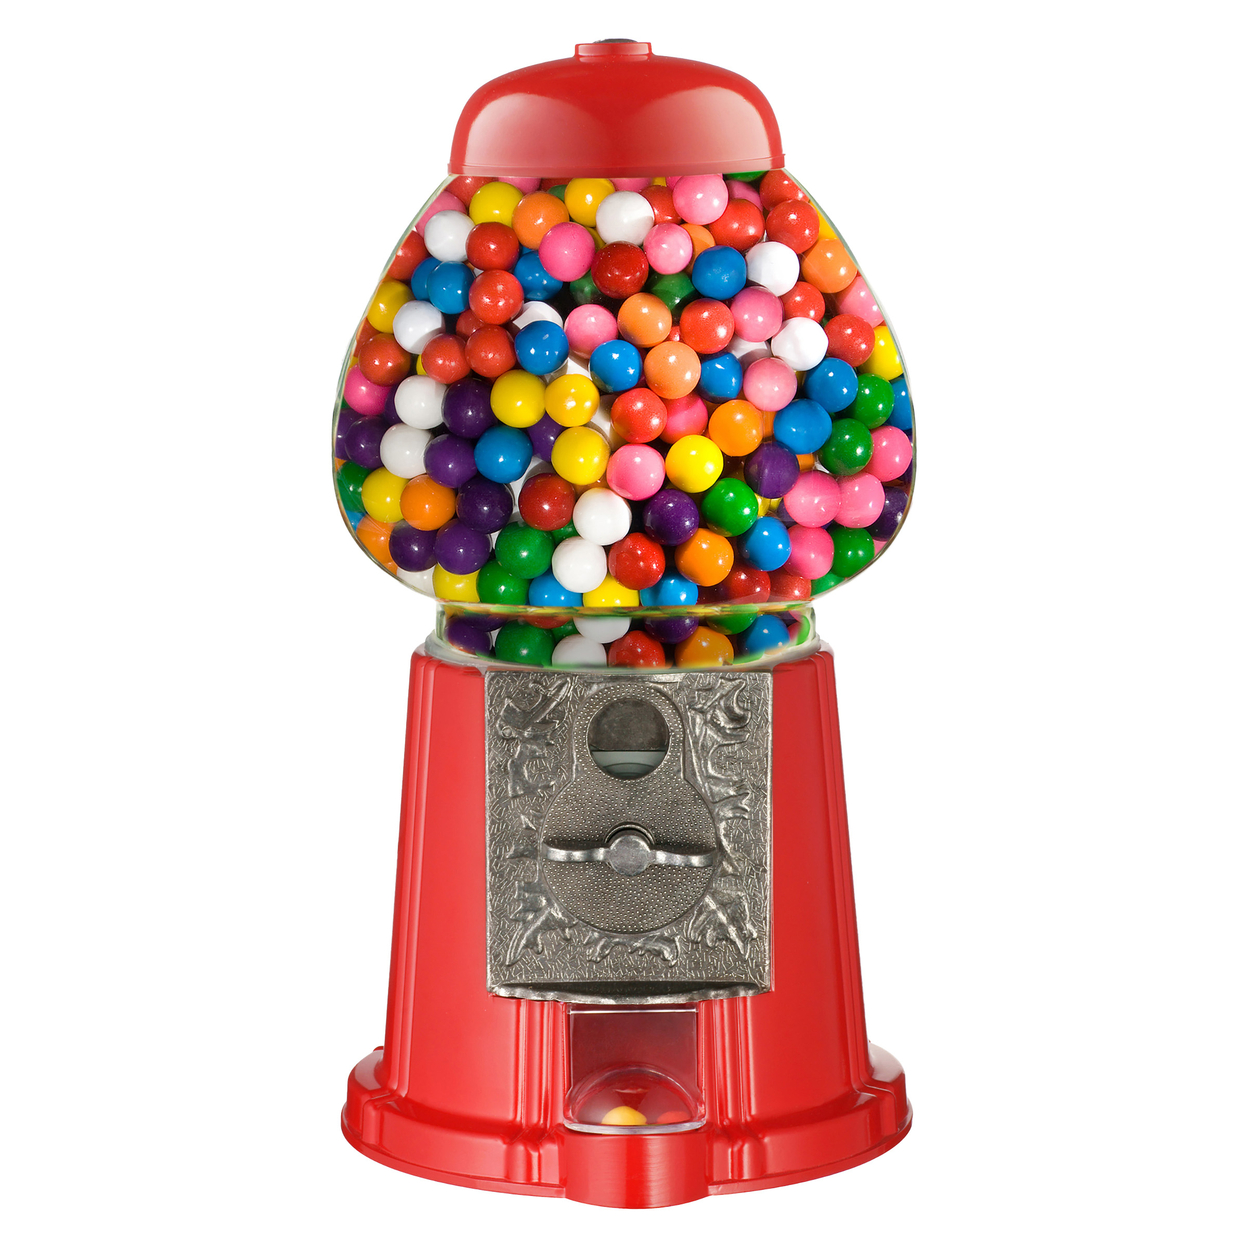 15 Candy Gumball Machine Bank Old Fashioned Metal Glass Ball Bubblegum